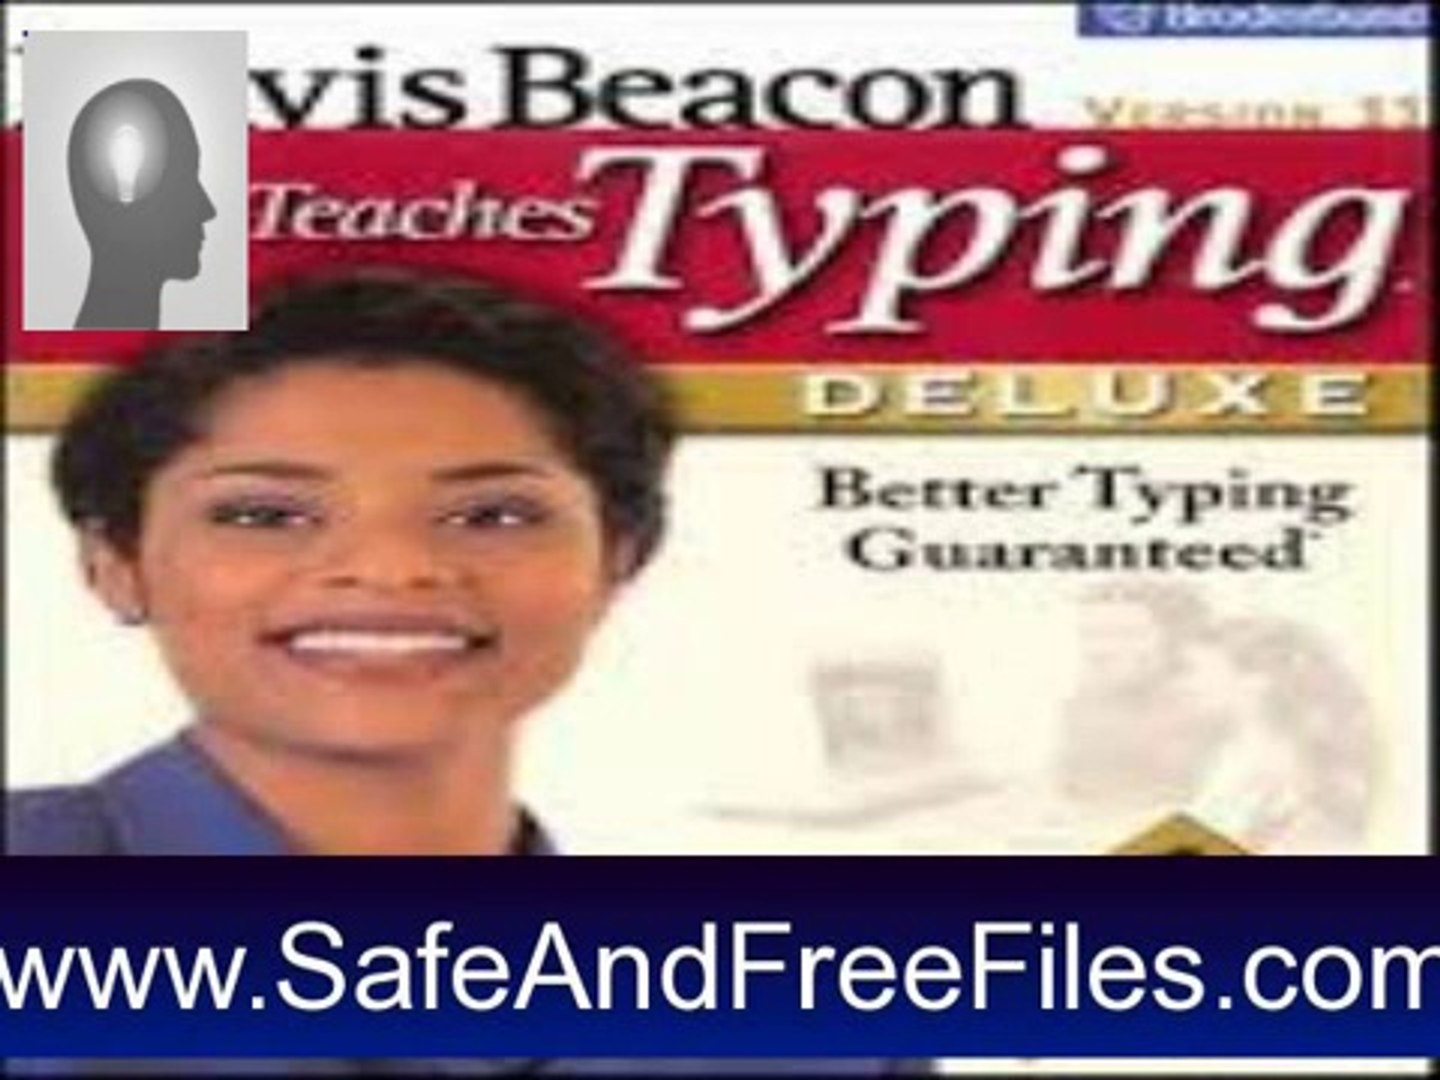 Mavis beacon teaches typing deluxe 17 free download serial numbers